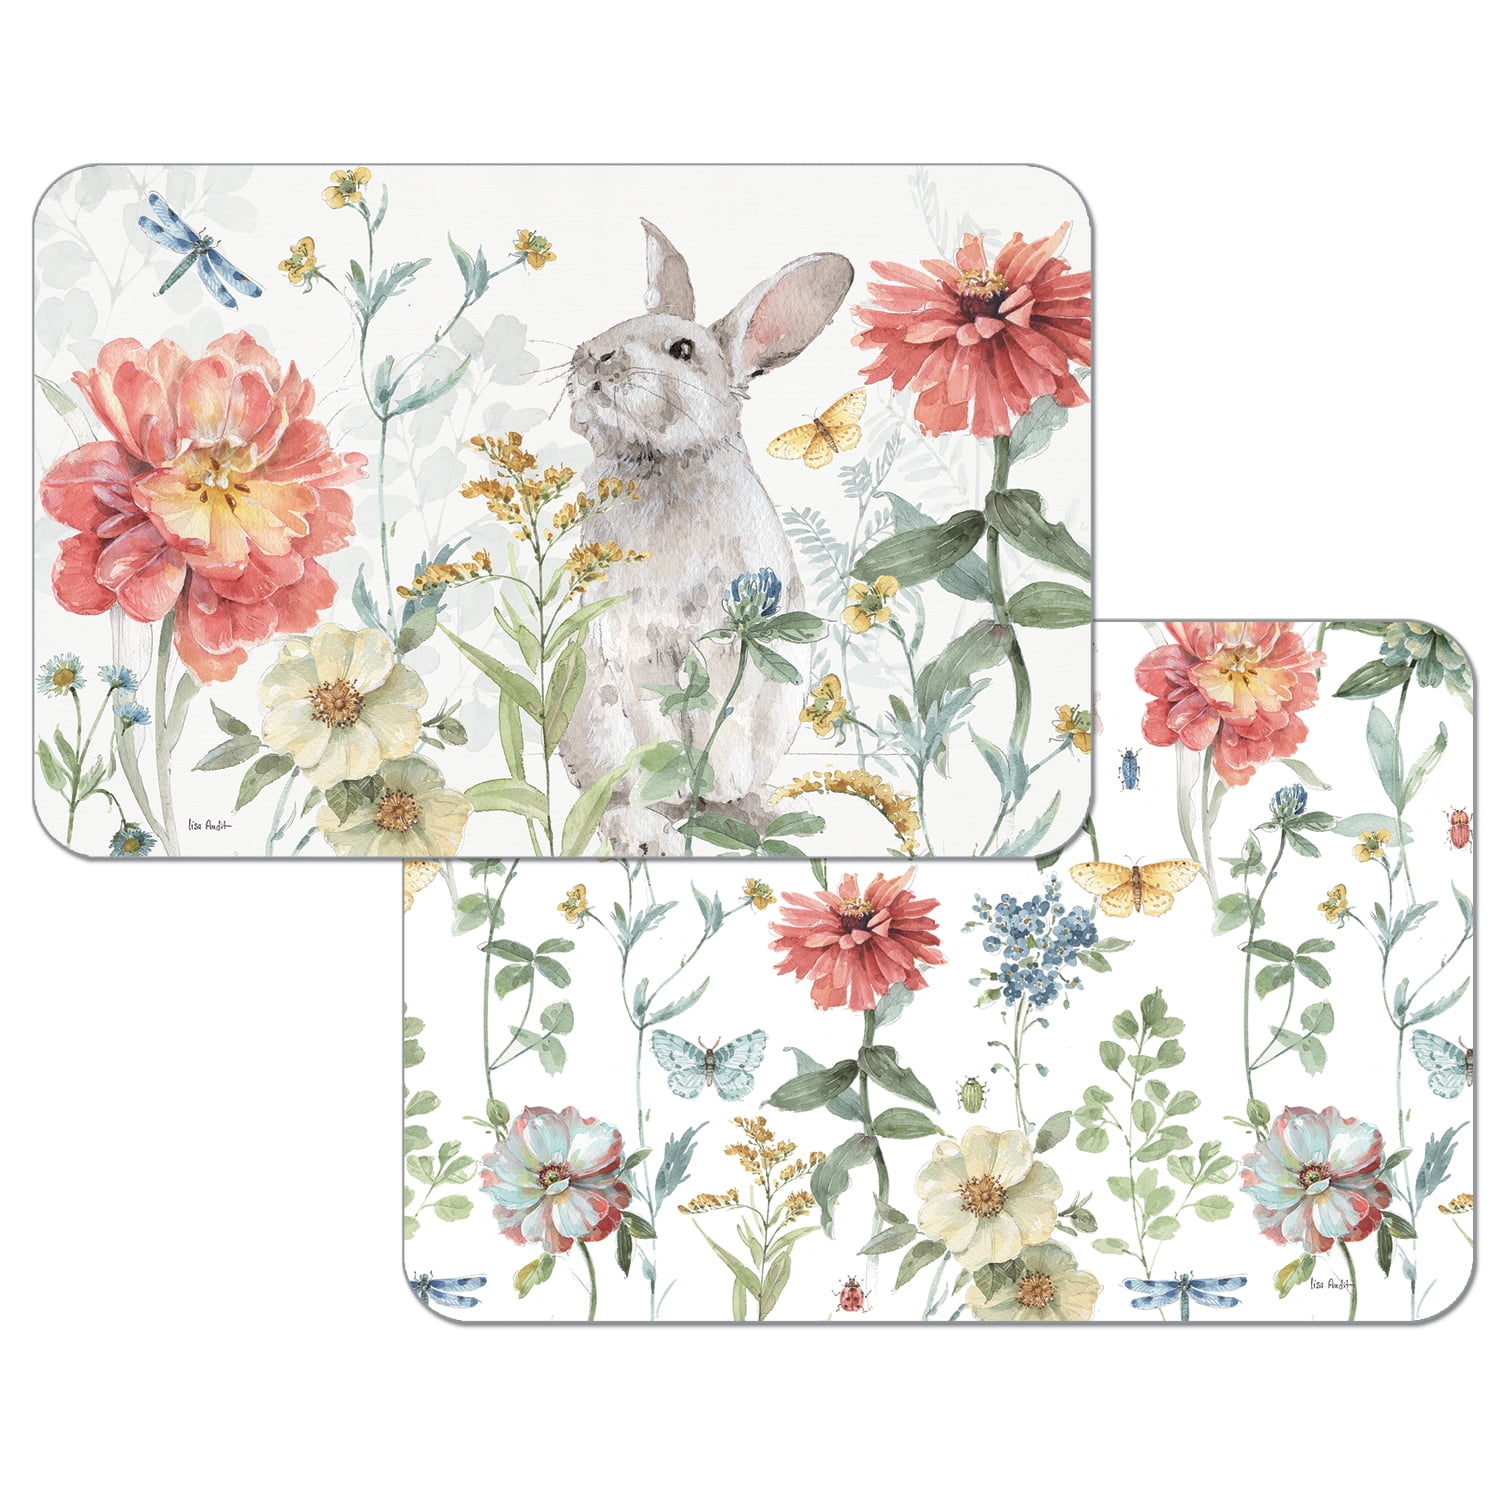 The Pioneer Woman Sweet Rose/Quited Placemats Reversible set of 2 